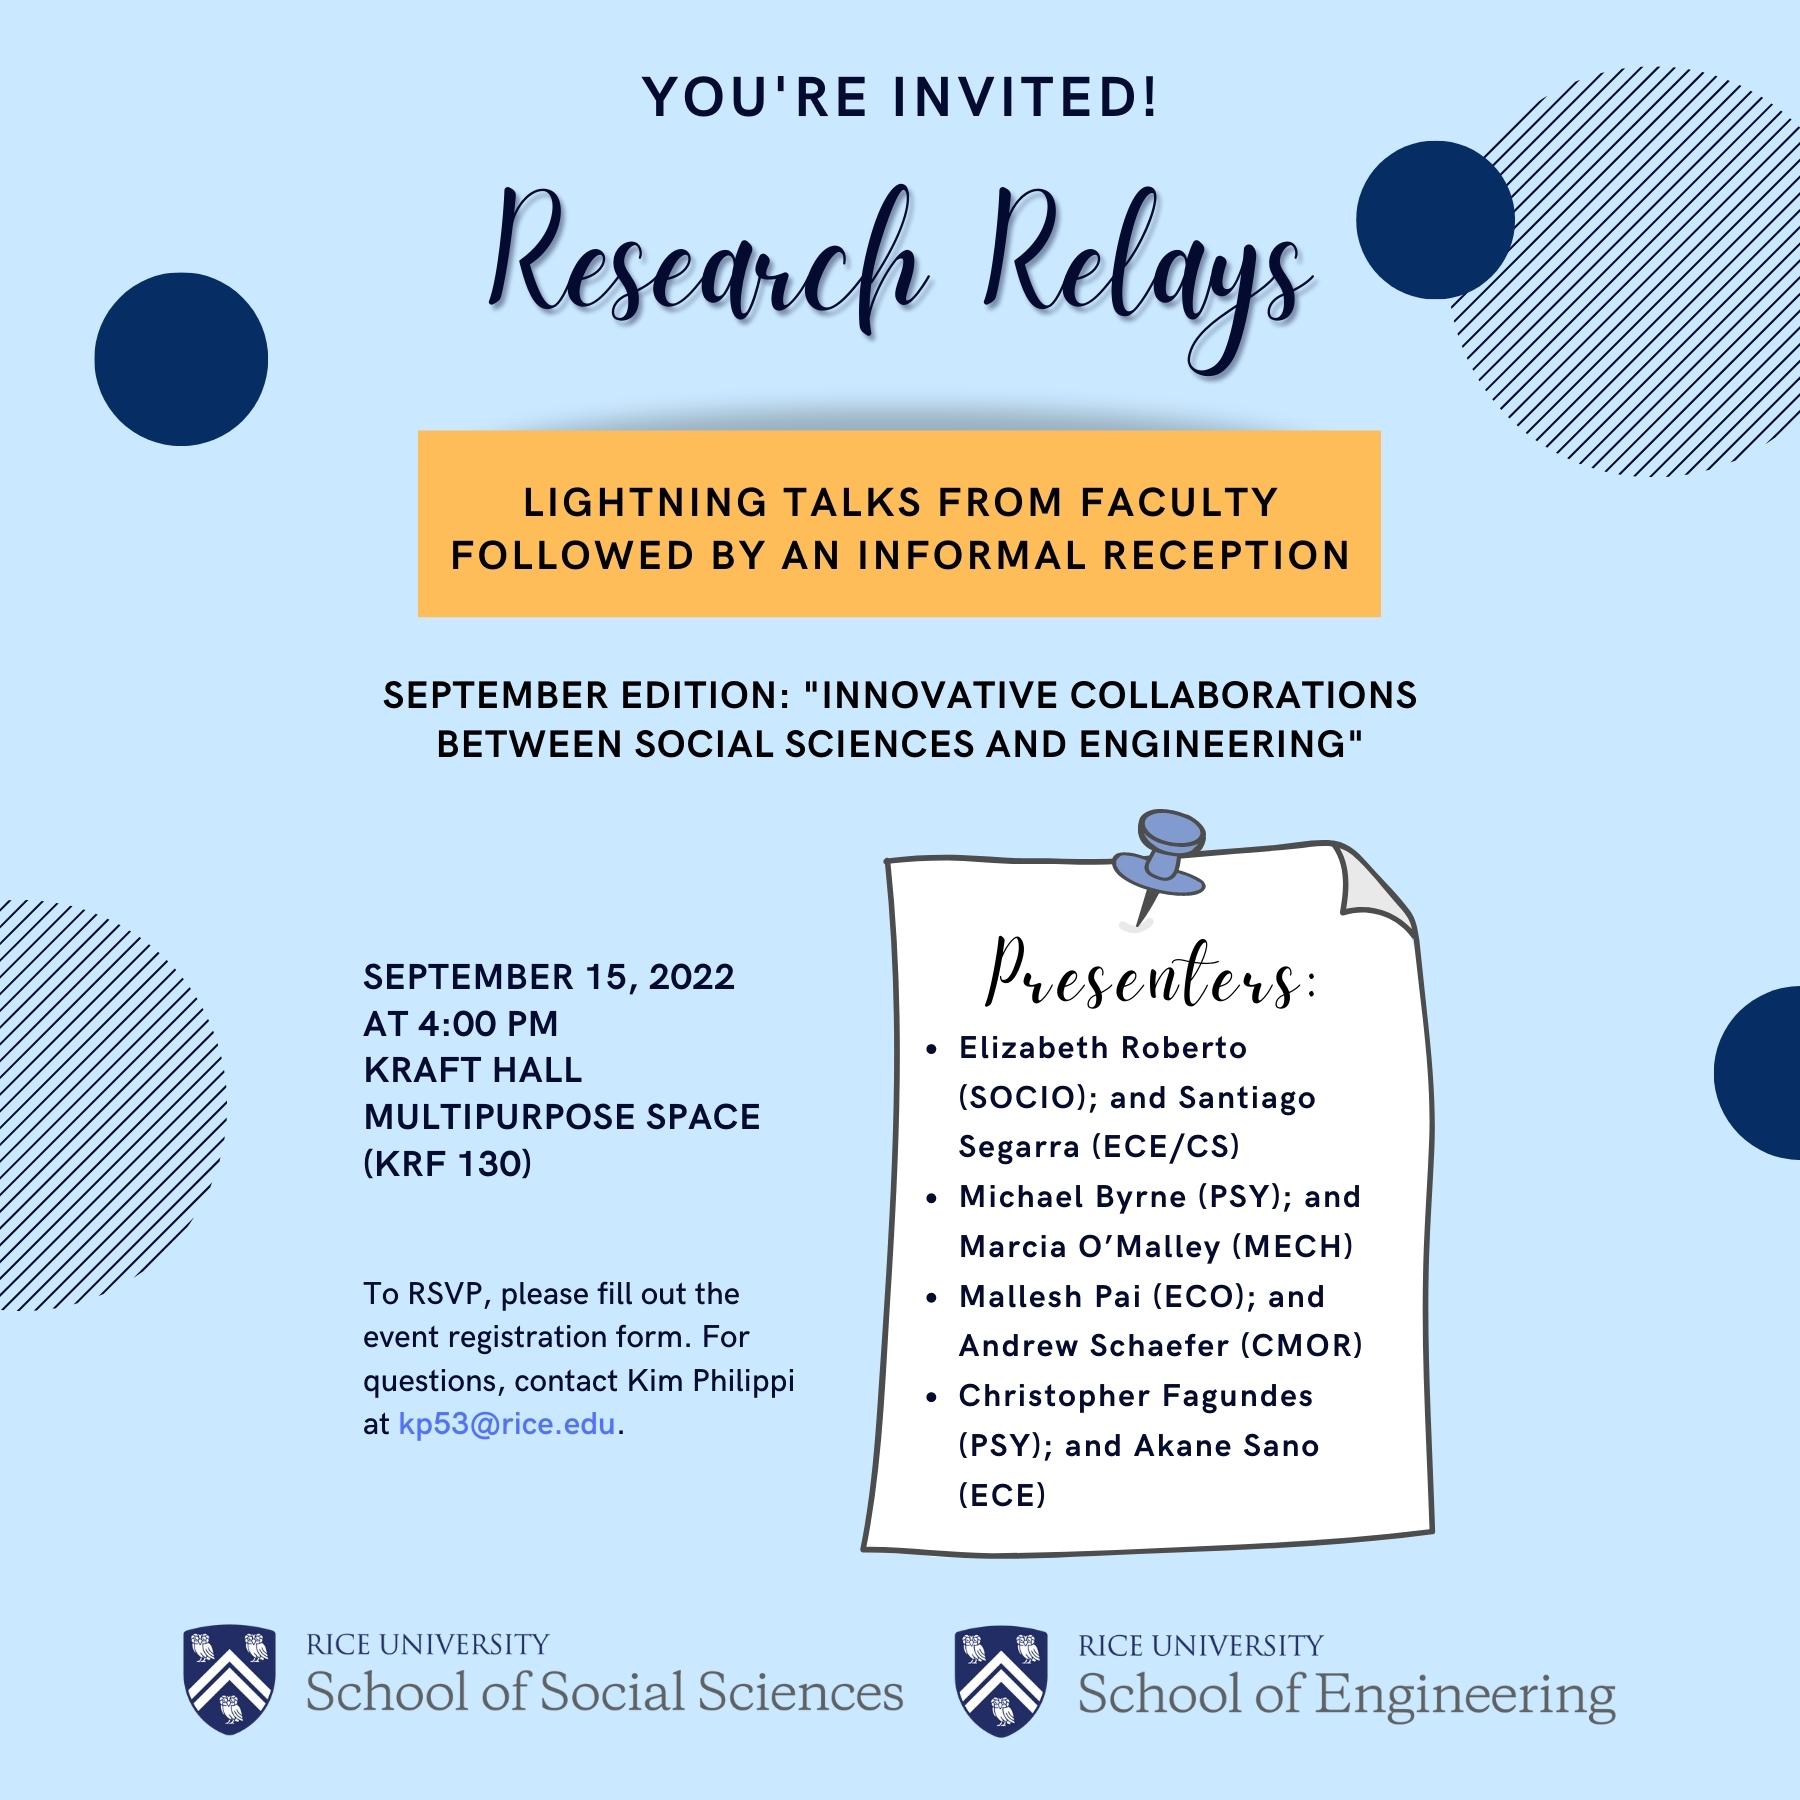 Research Relays Event Flyer